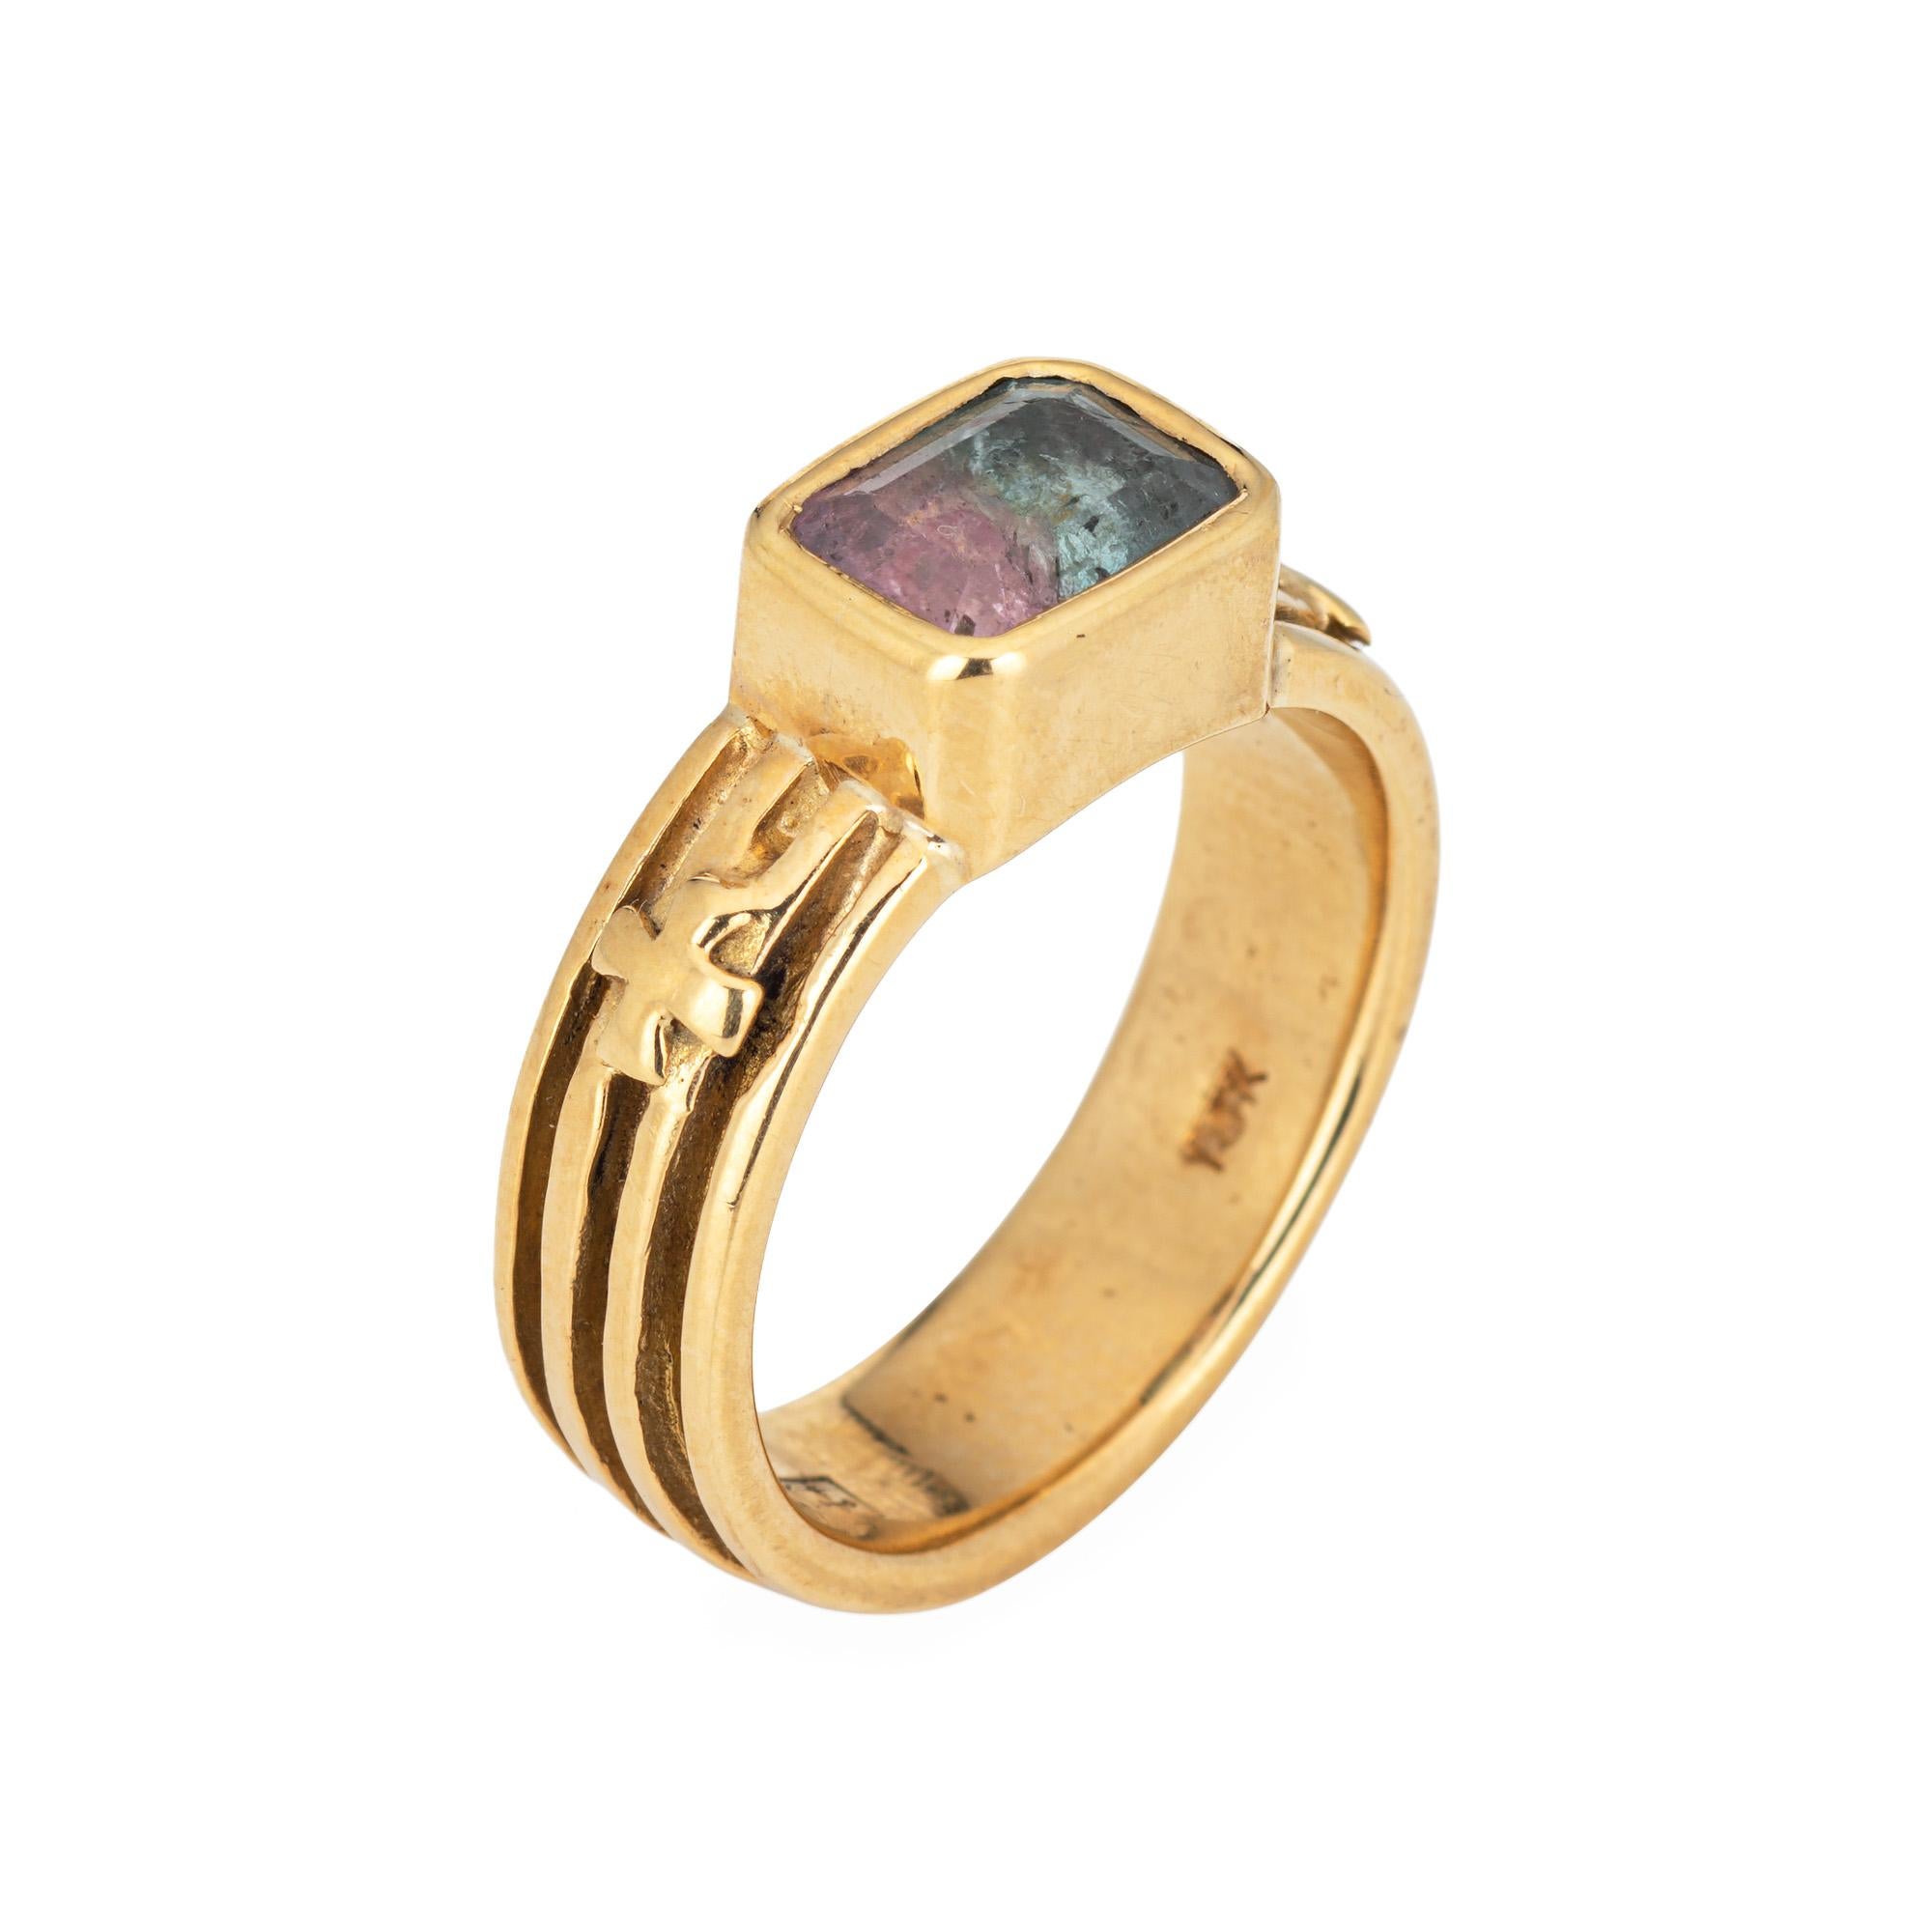 Stylish Loree Rodkin watermelon tourmaline ring, crafted in 18 karat yellow gold. 

Watermelon tourmaline measures 7.5mm x 5.5mm and is estimated at 1.40 carats.

Bezel set in an east to west design, the watermelon tourmaline band is great worn